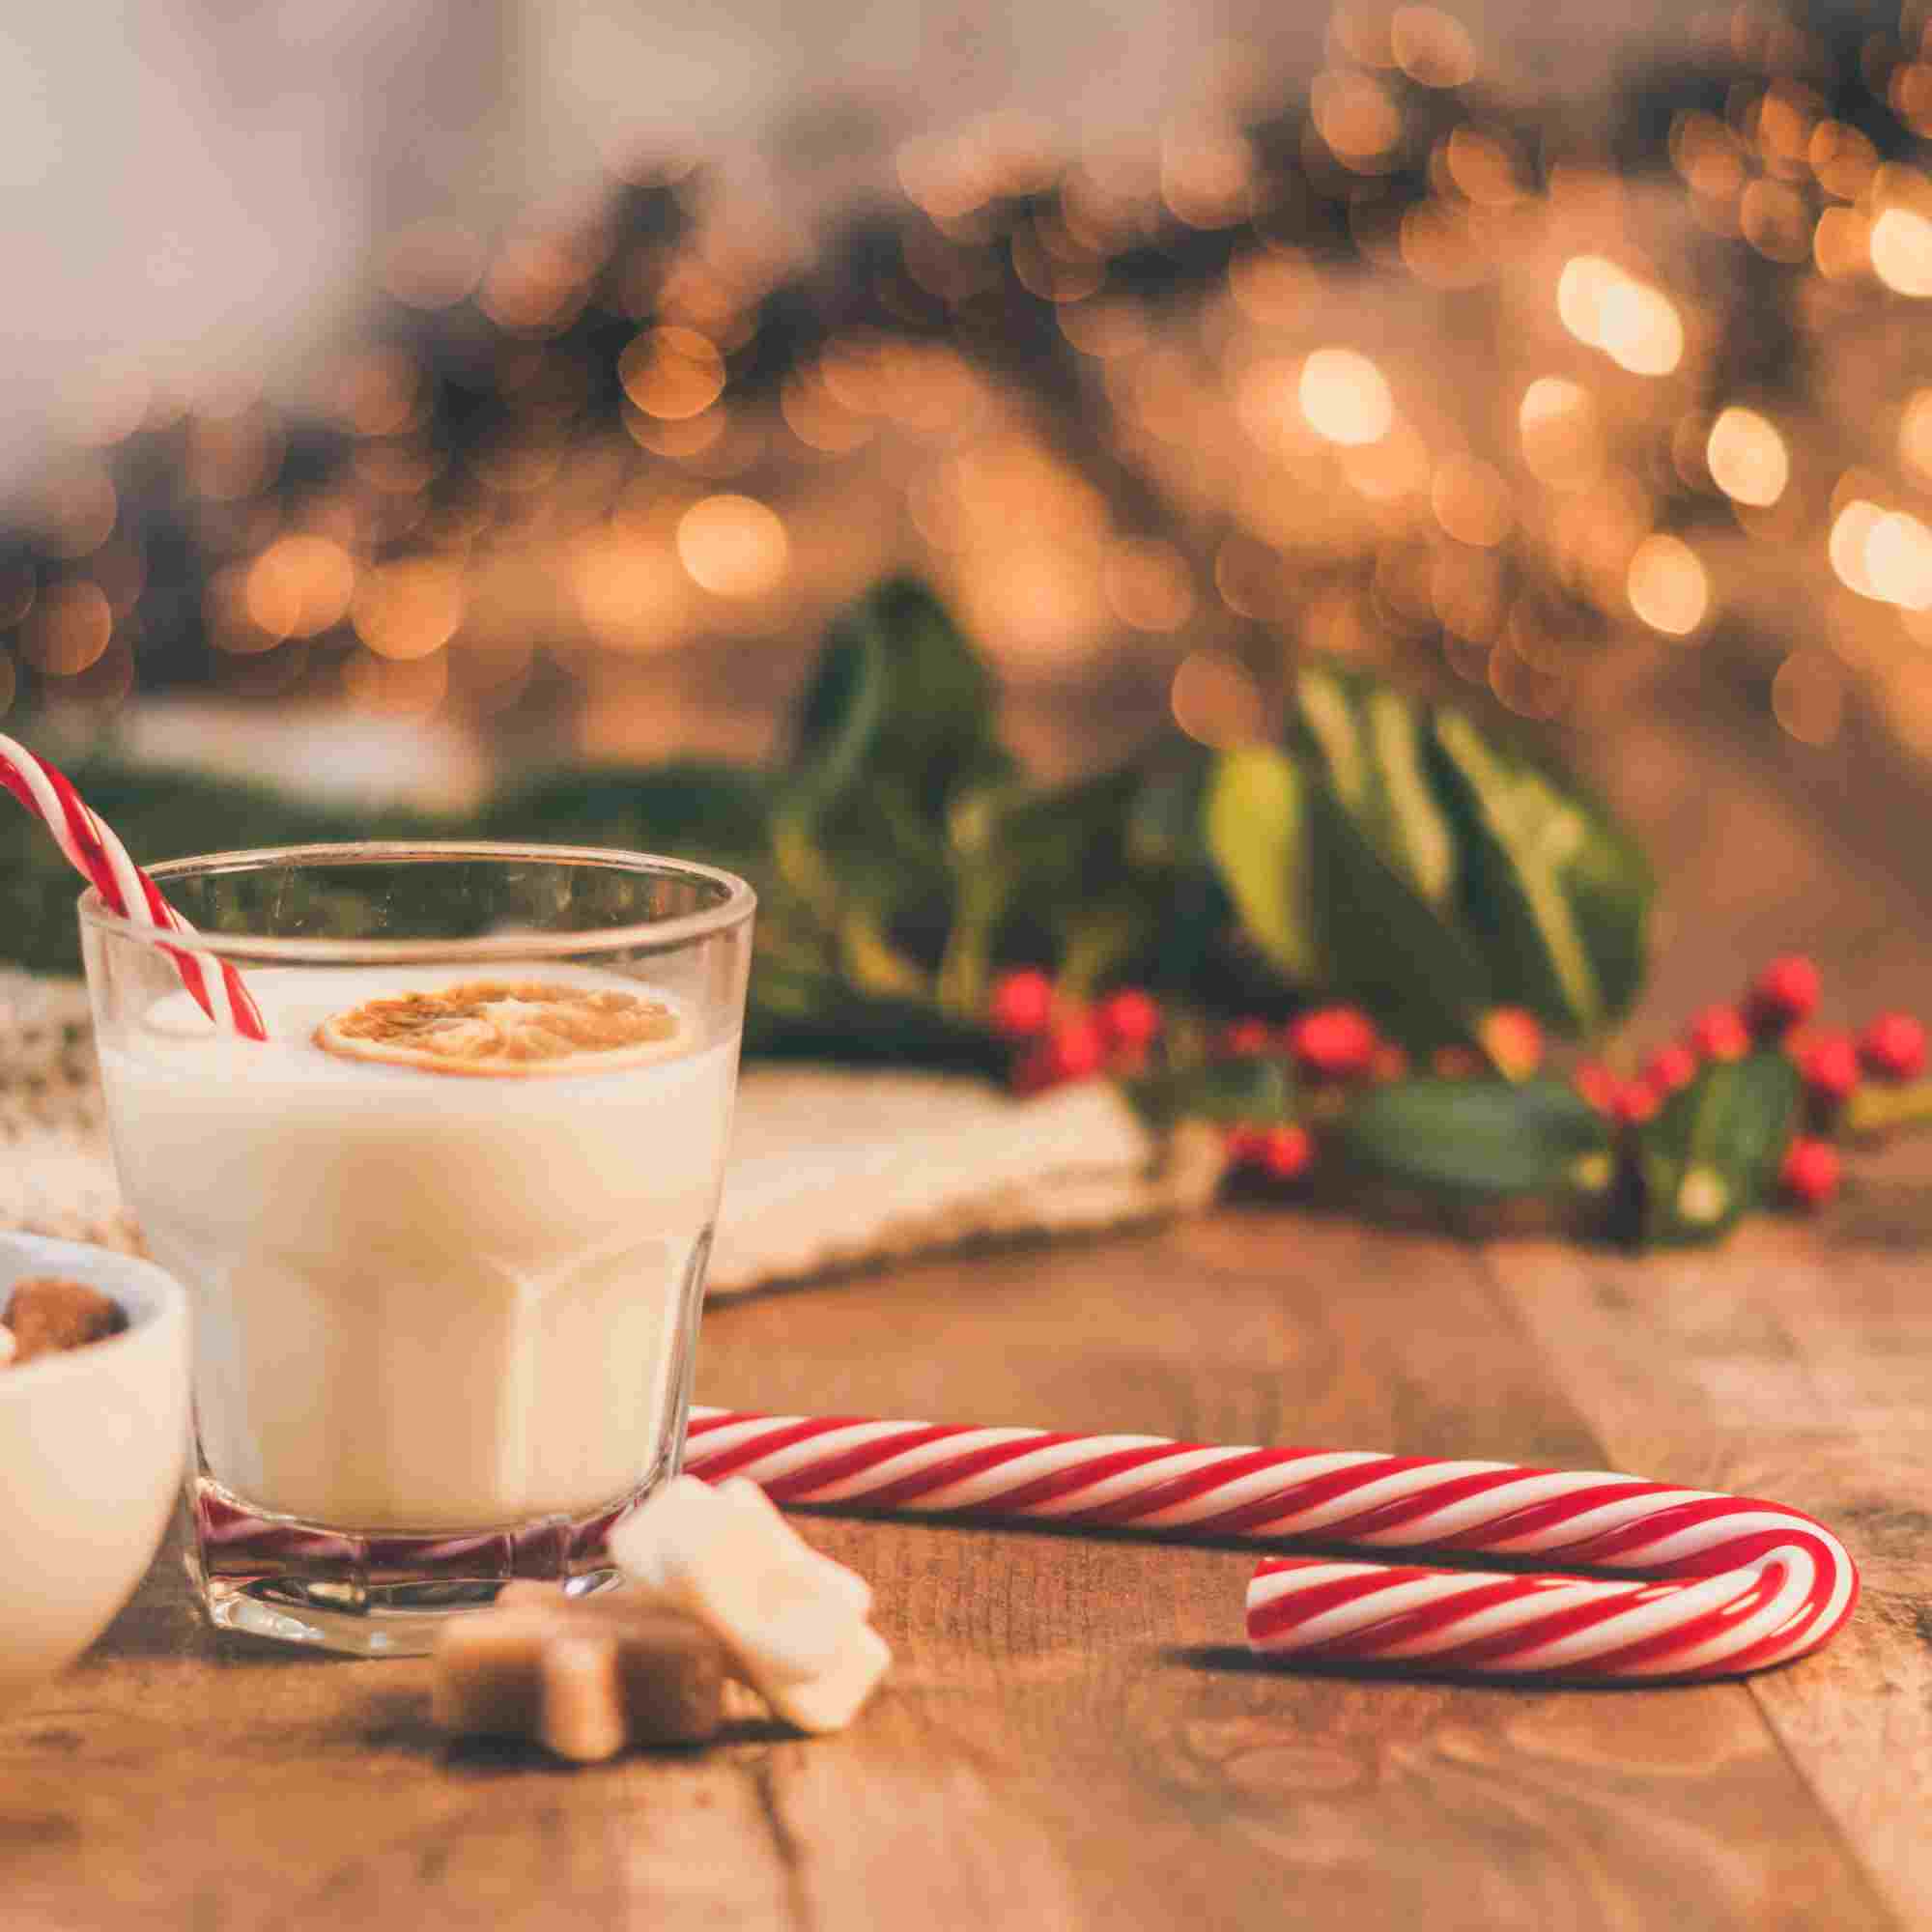 A glass of milk with candy canes on a wooden table.